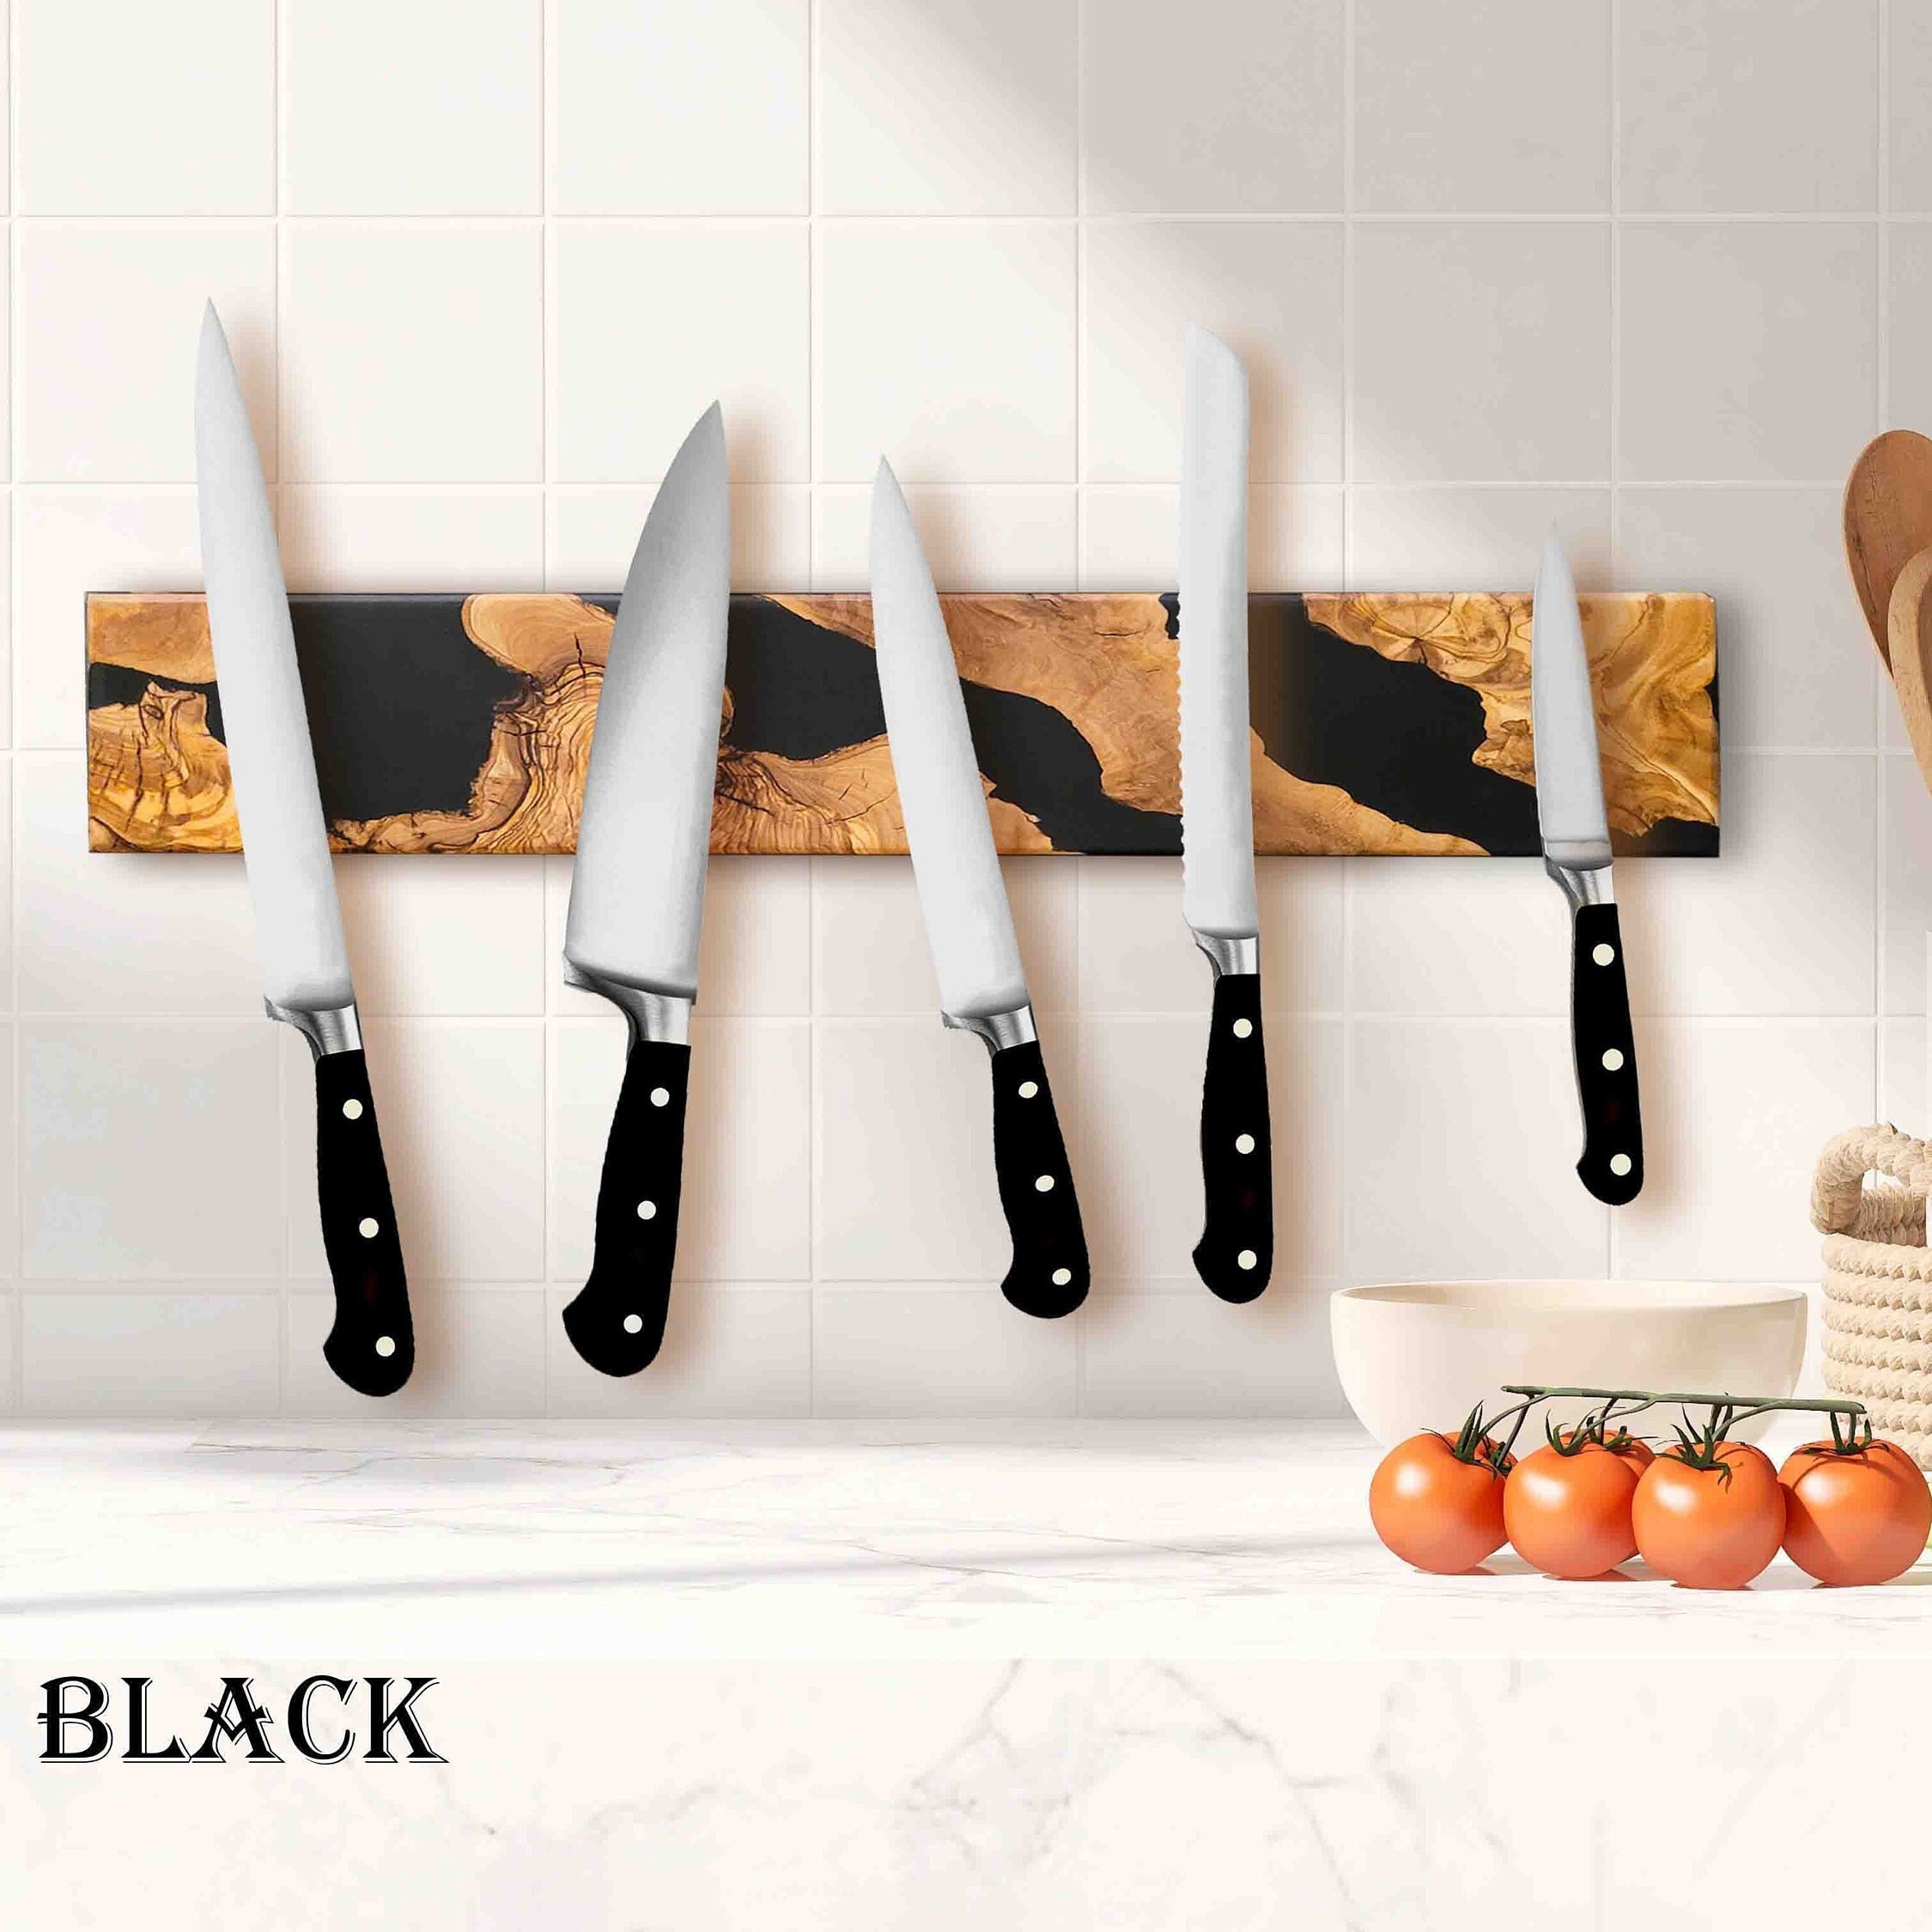 Global GS GS-103 Kitchen Shears and Block - Sets from Knives from Japan ltd  T/A Global Knives UK